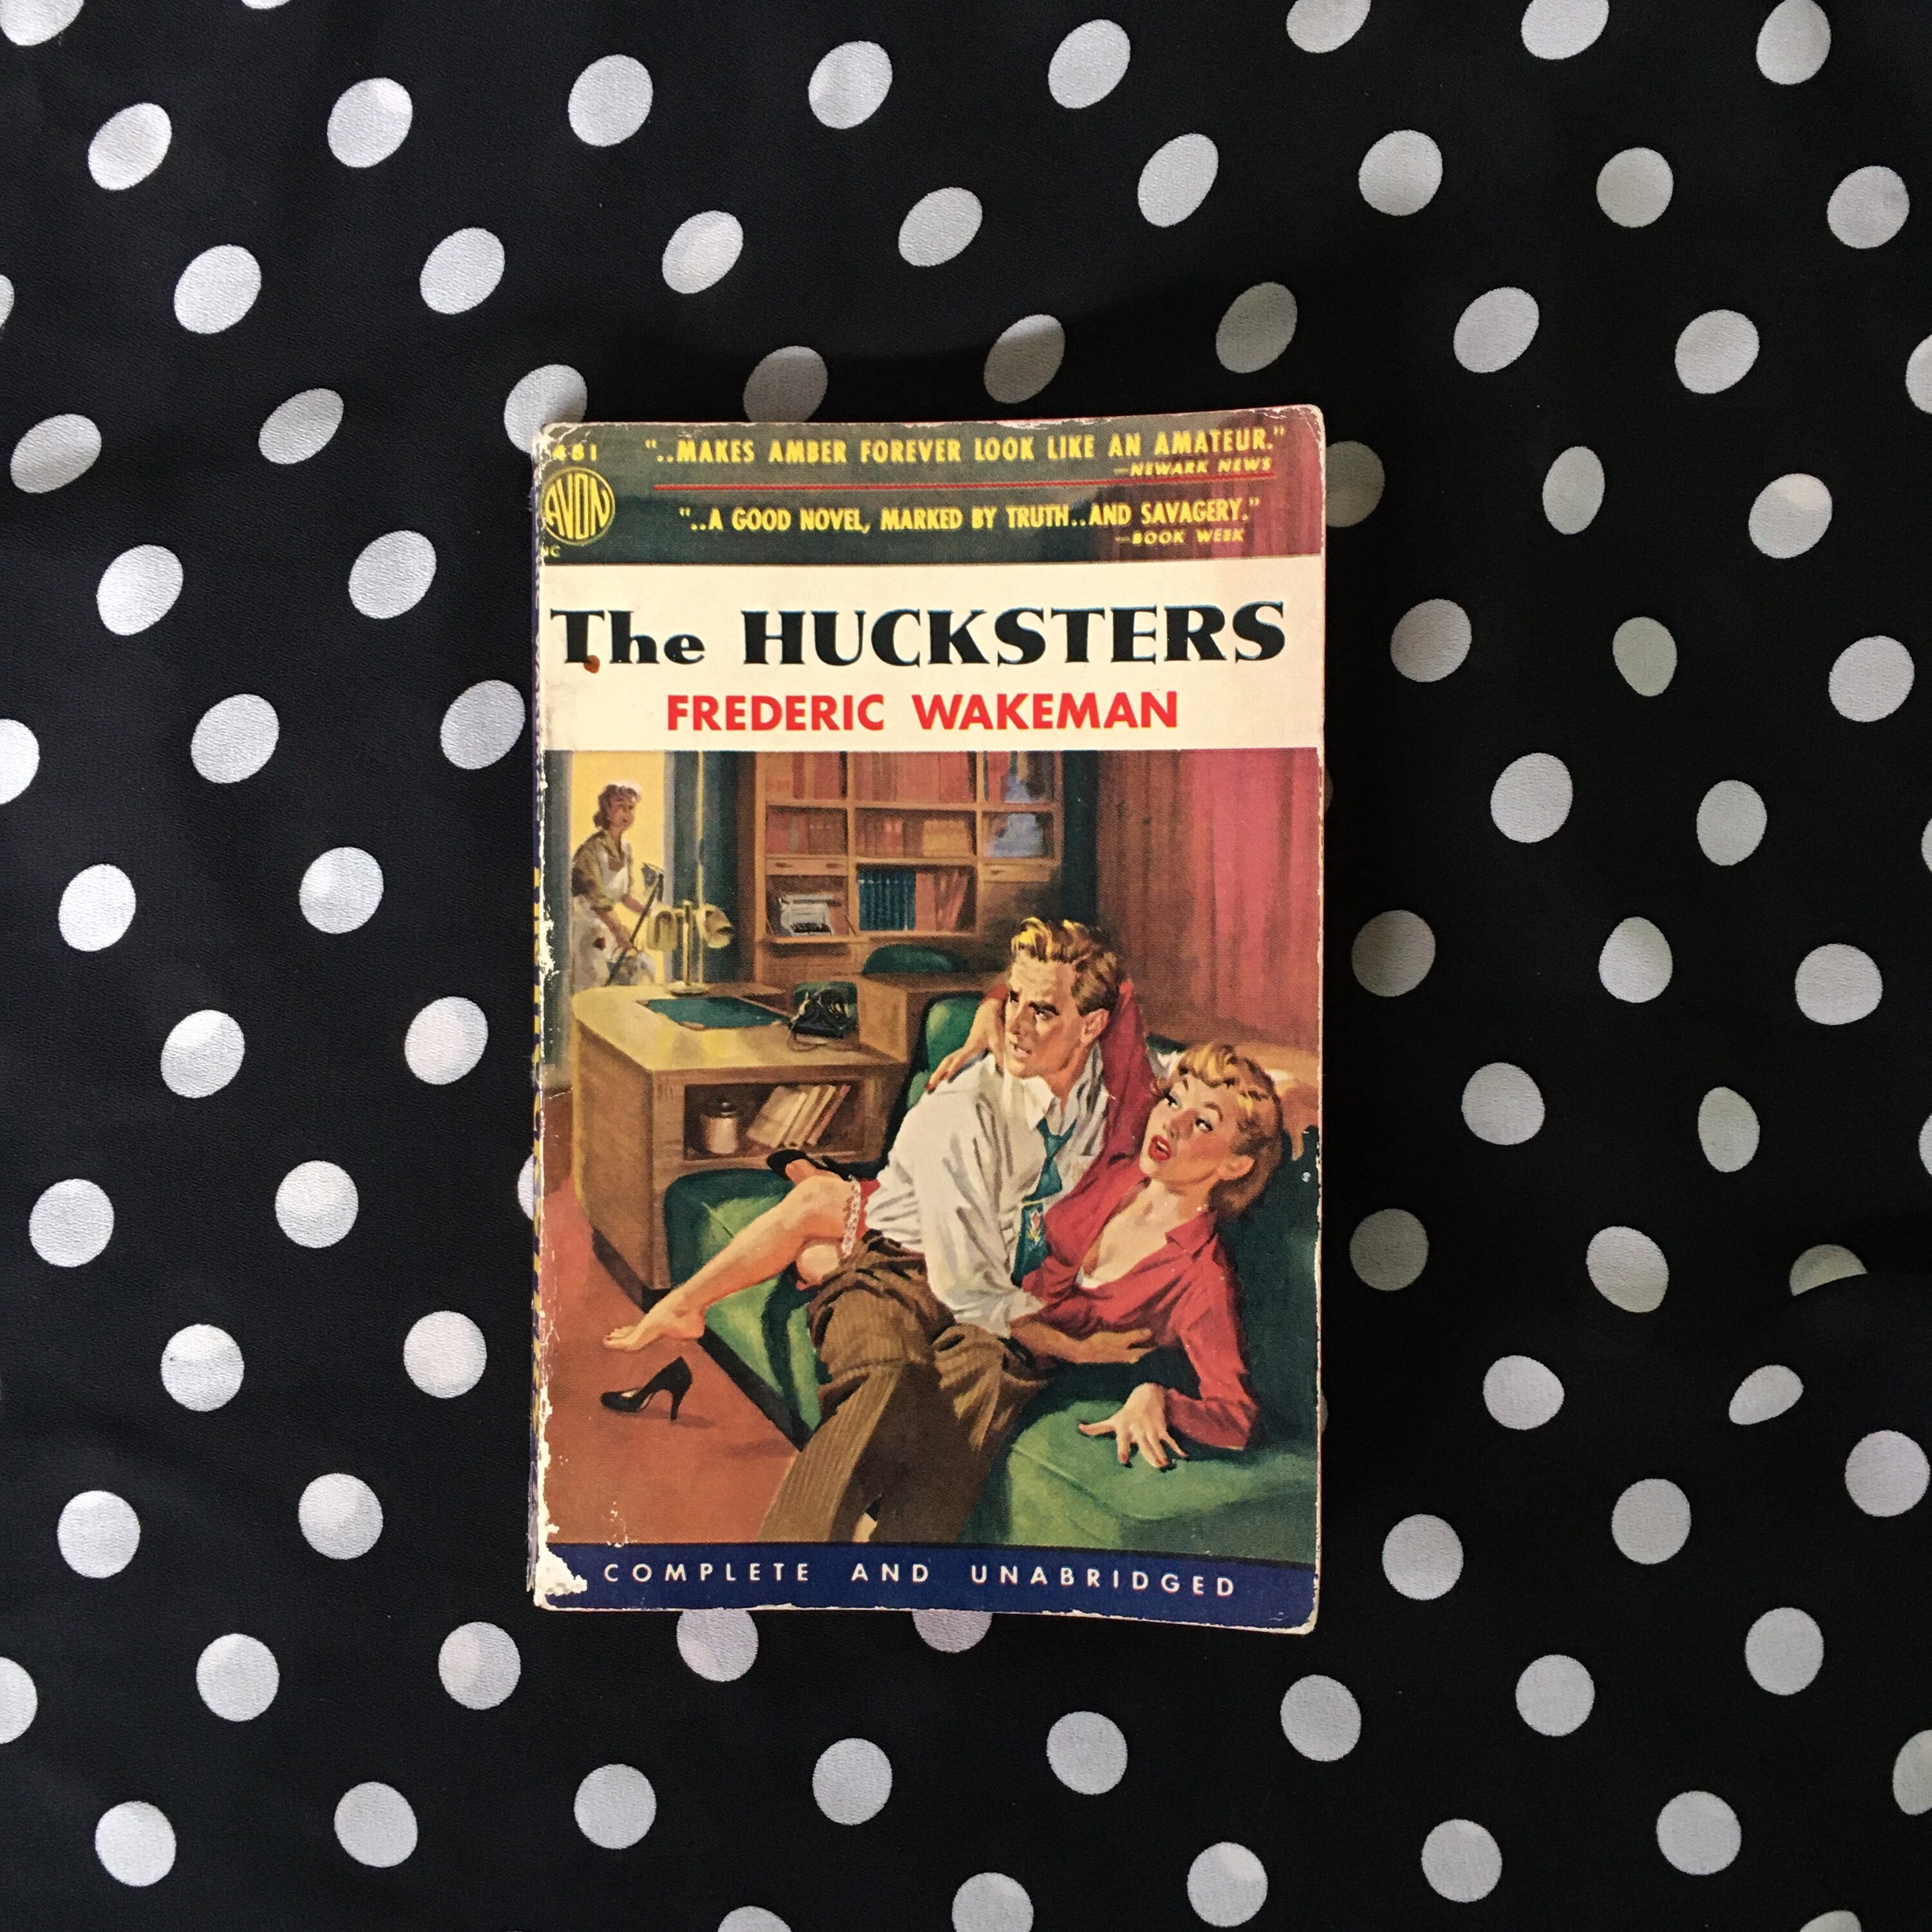 The Hucksters by Frederic Wakeman Vintage 1952 Paperback